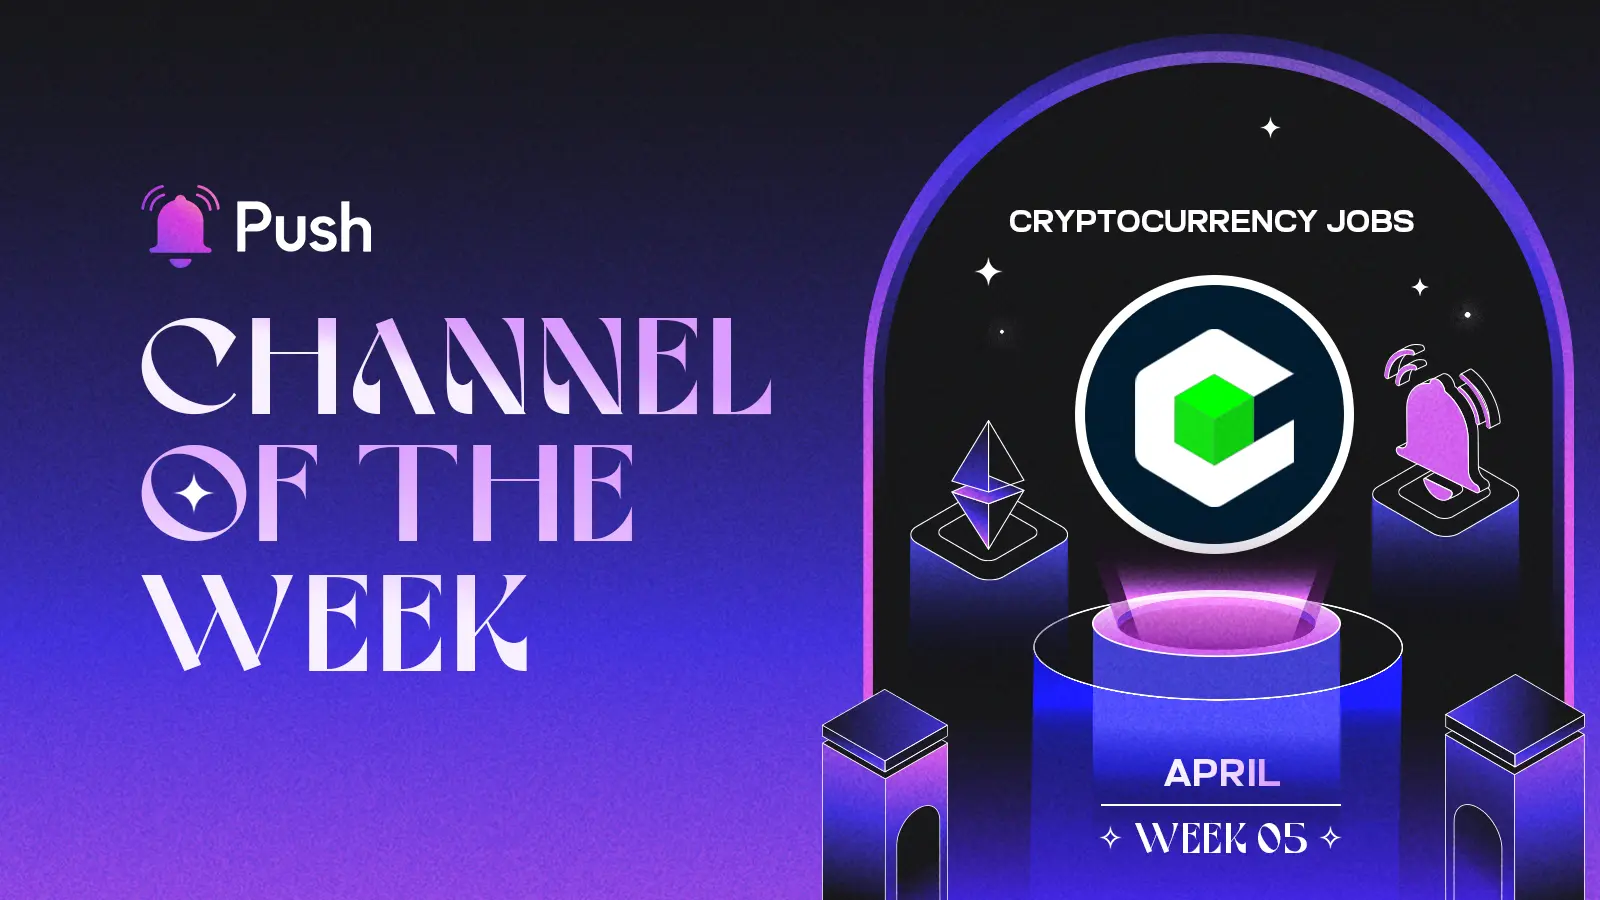 Banner celebrating Cryptocurrency Jobs as April - week 5 channel of week